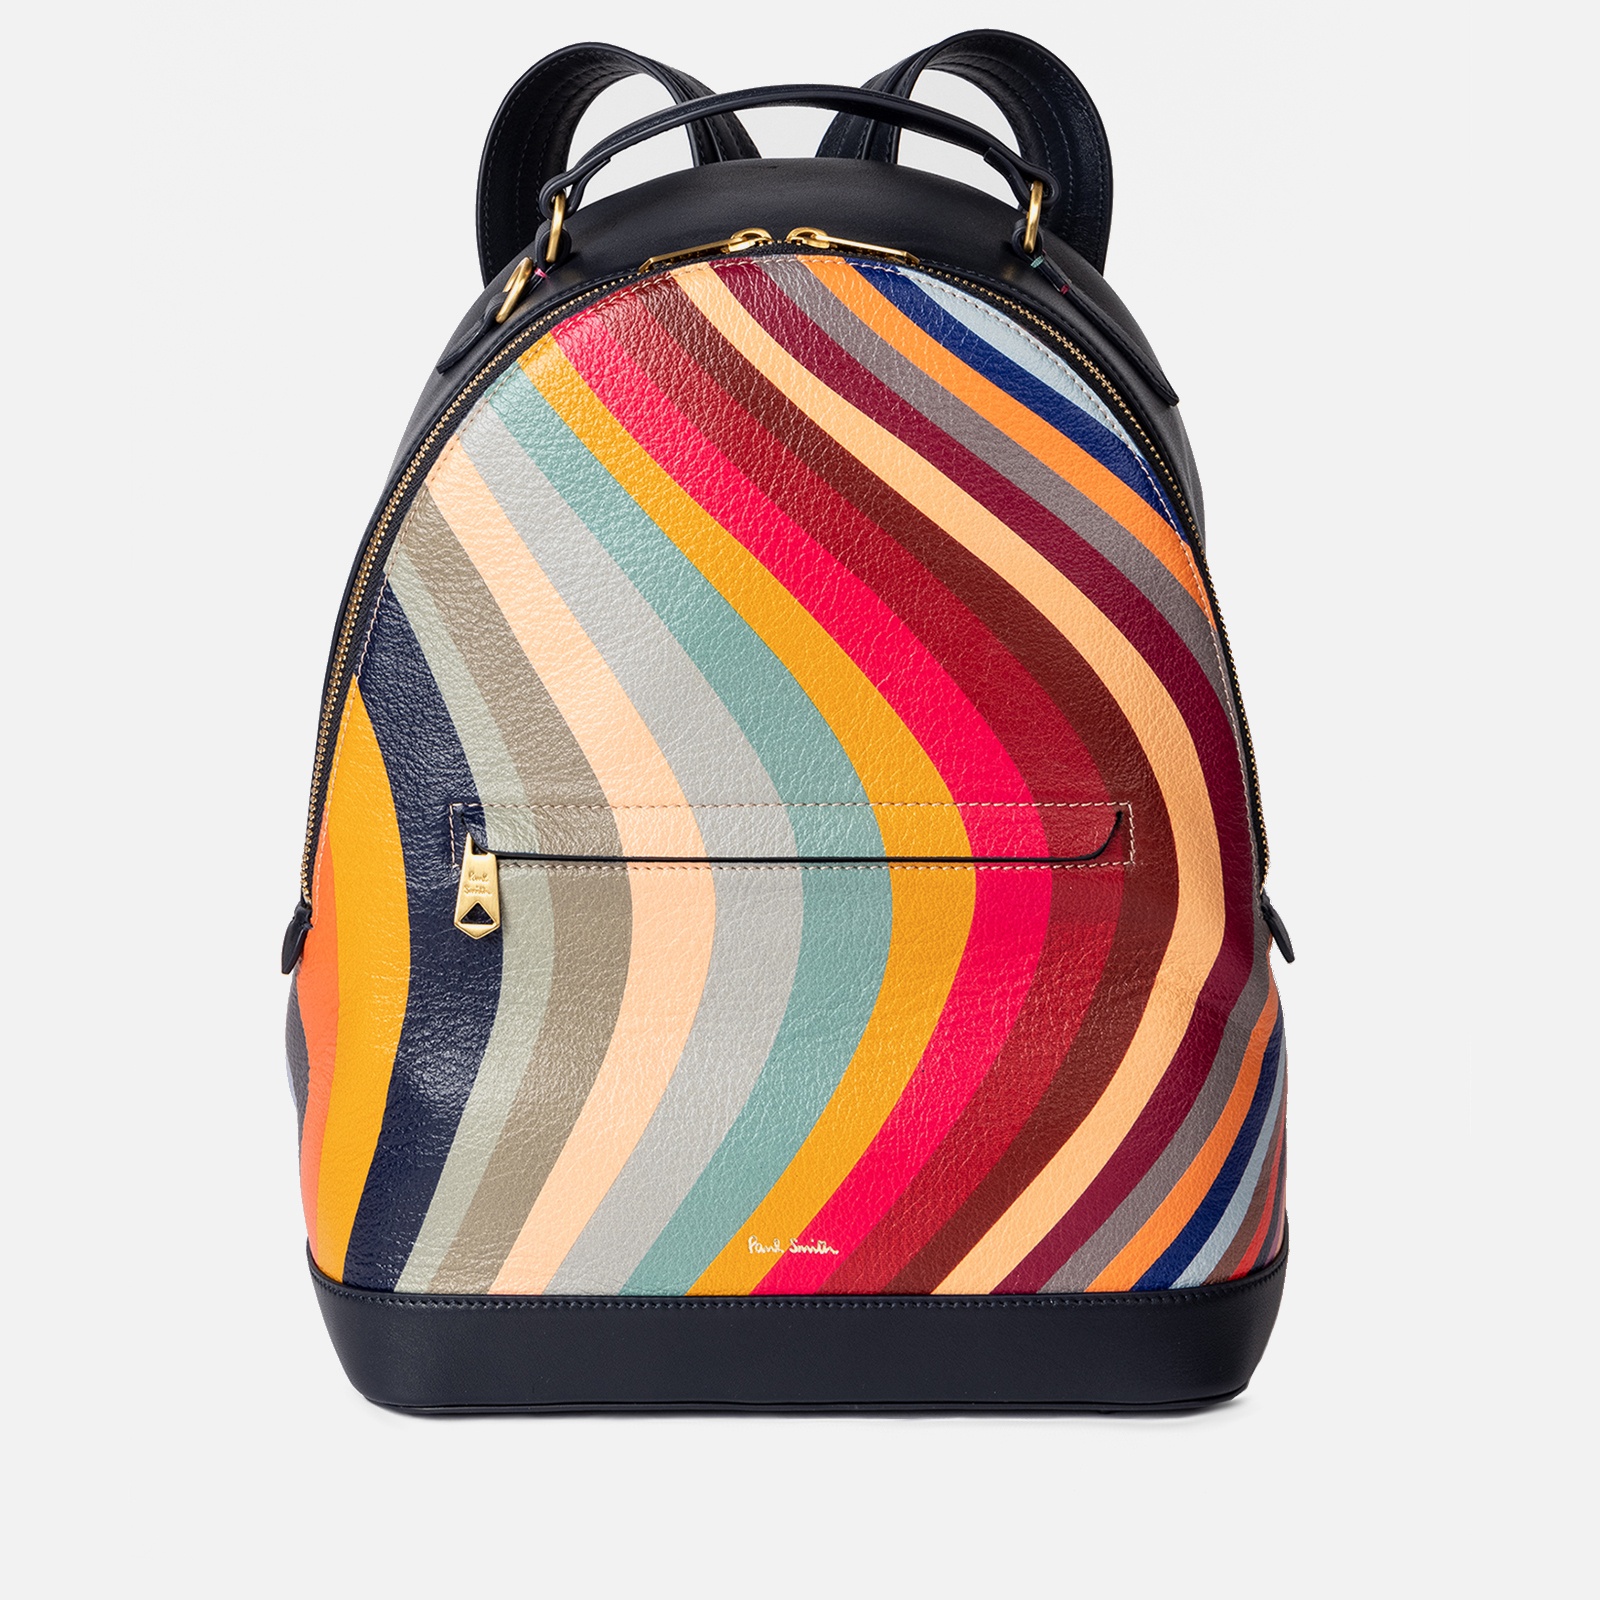 Paul Smith Swirl Striped Leather Backpack - 1